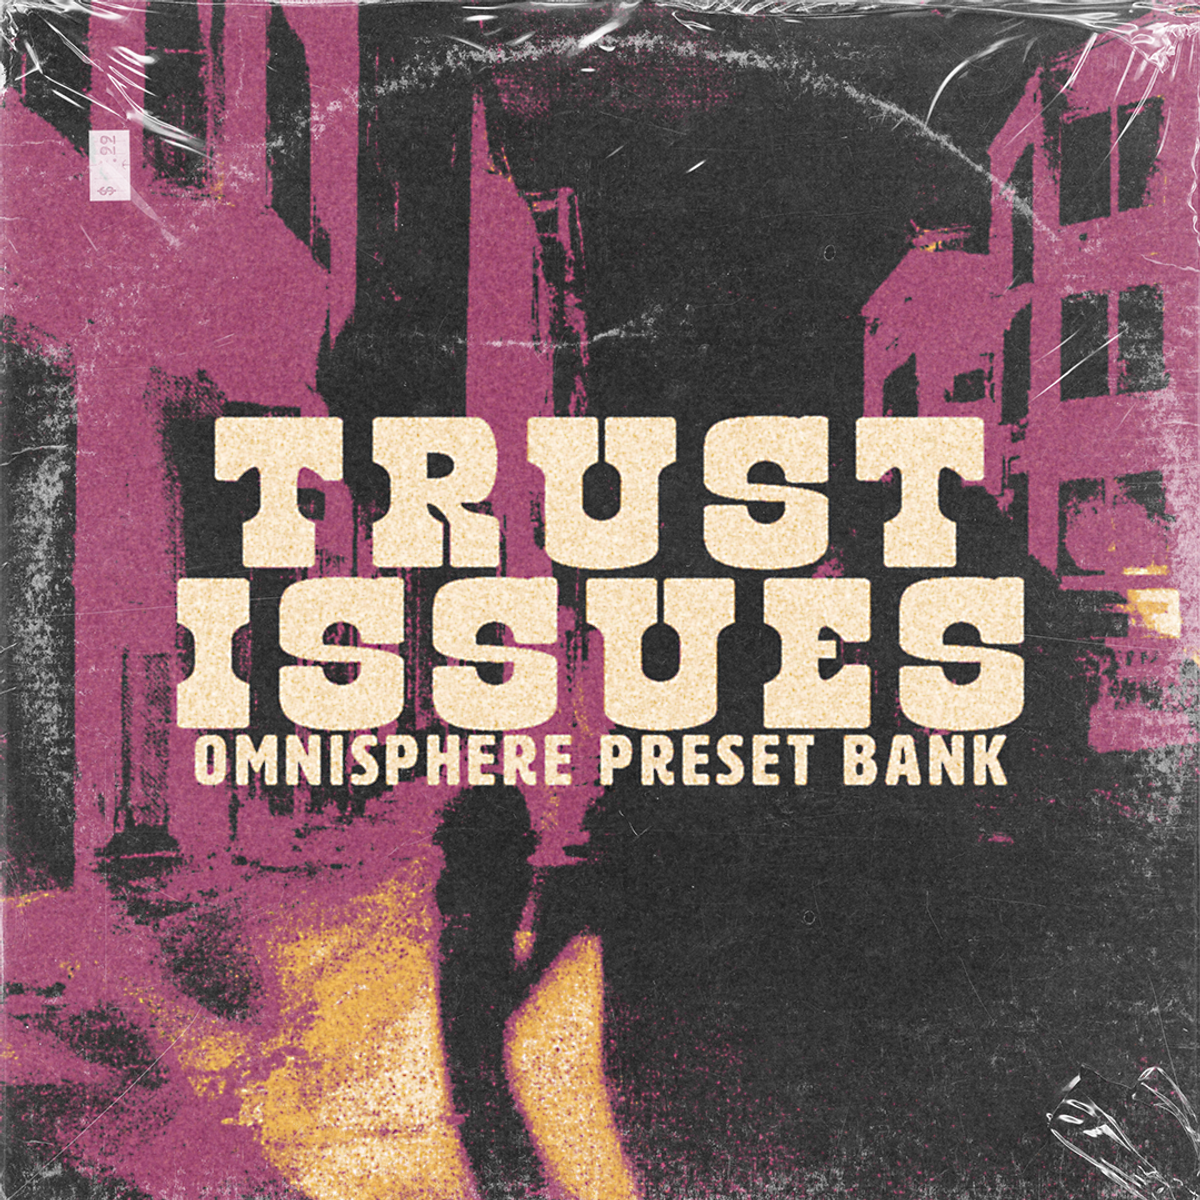 https://audiojuice.co/products/trust-issues-omnisphere-bank